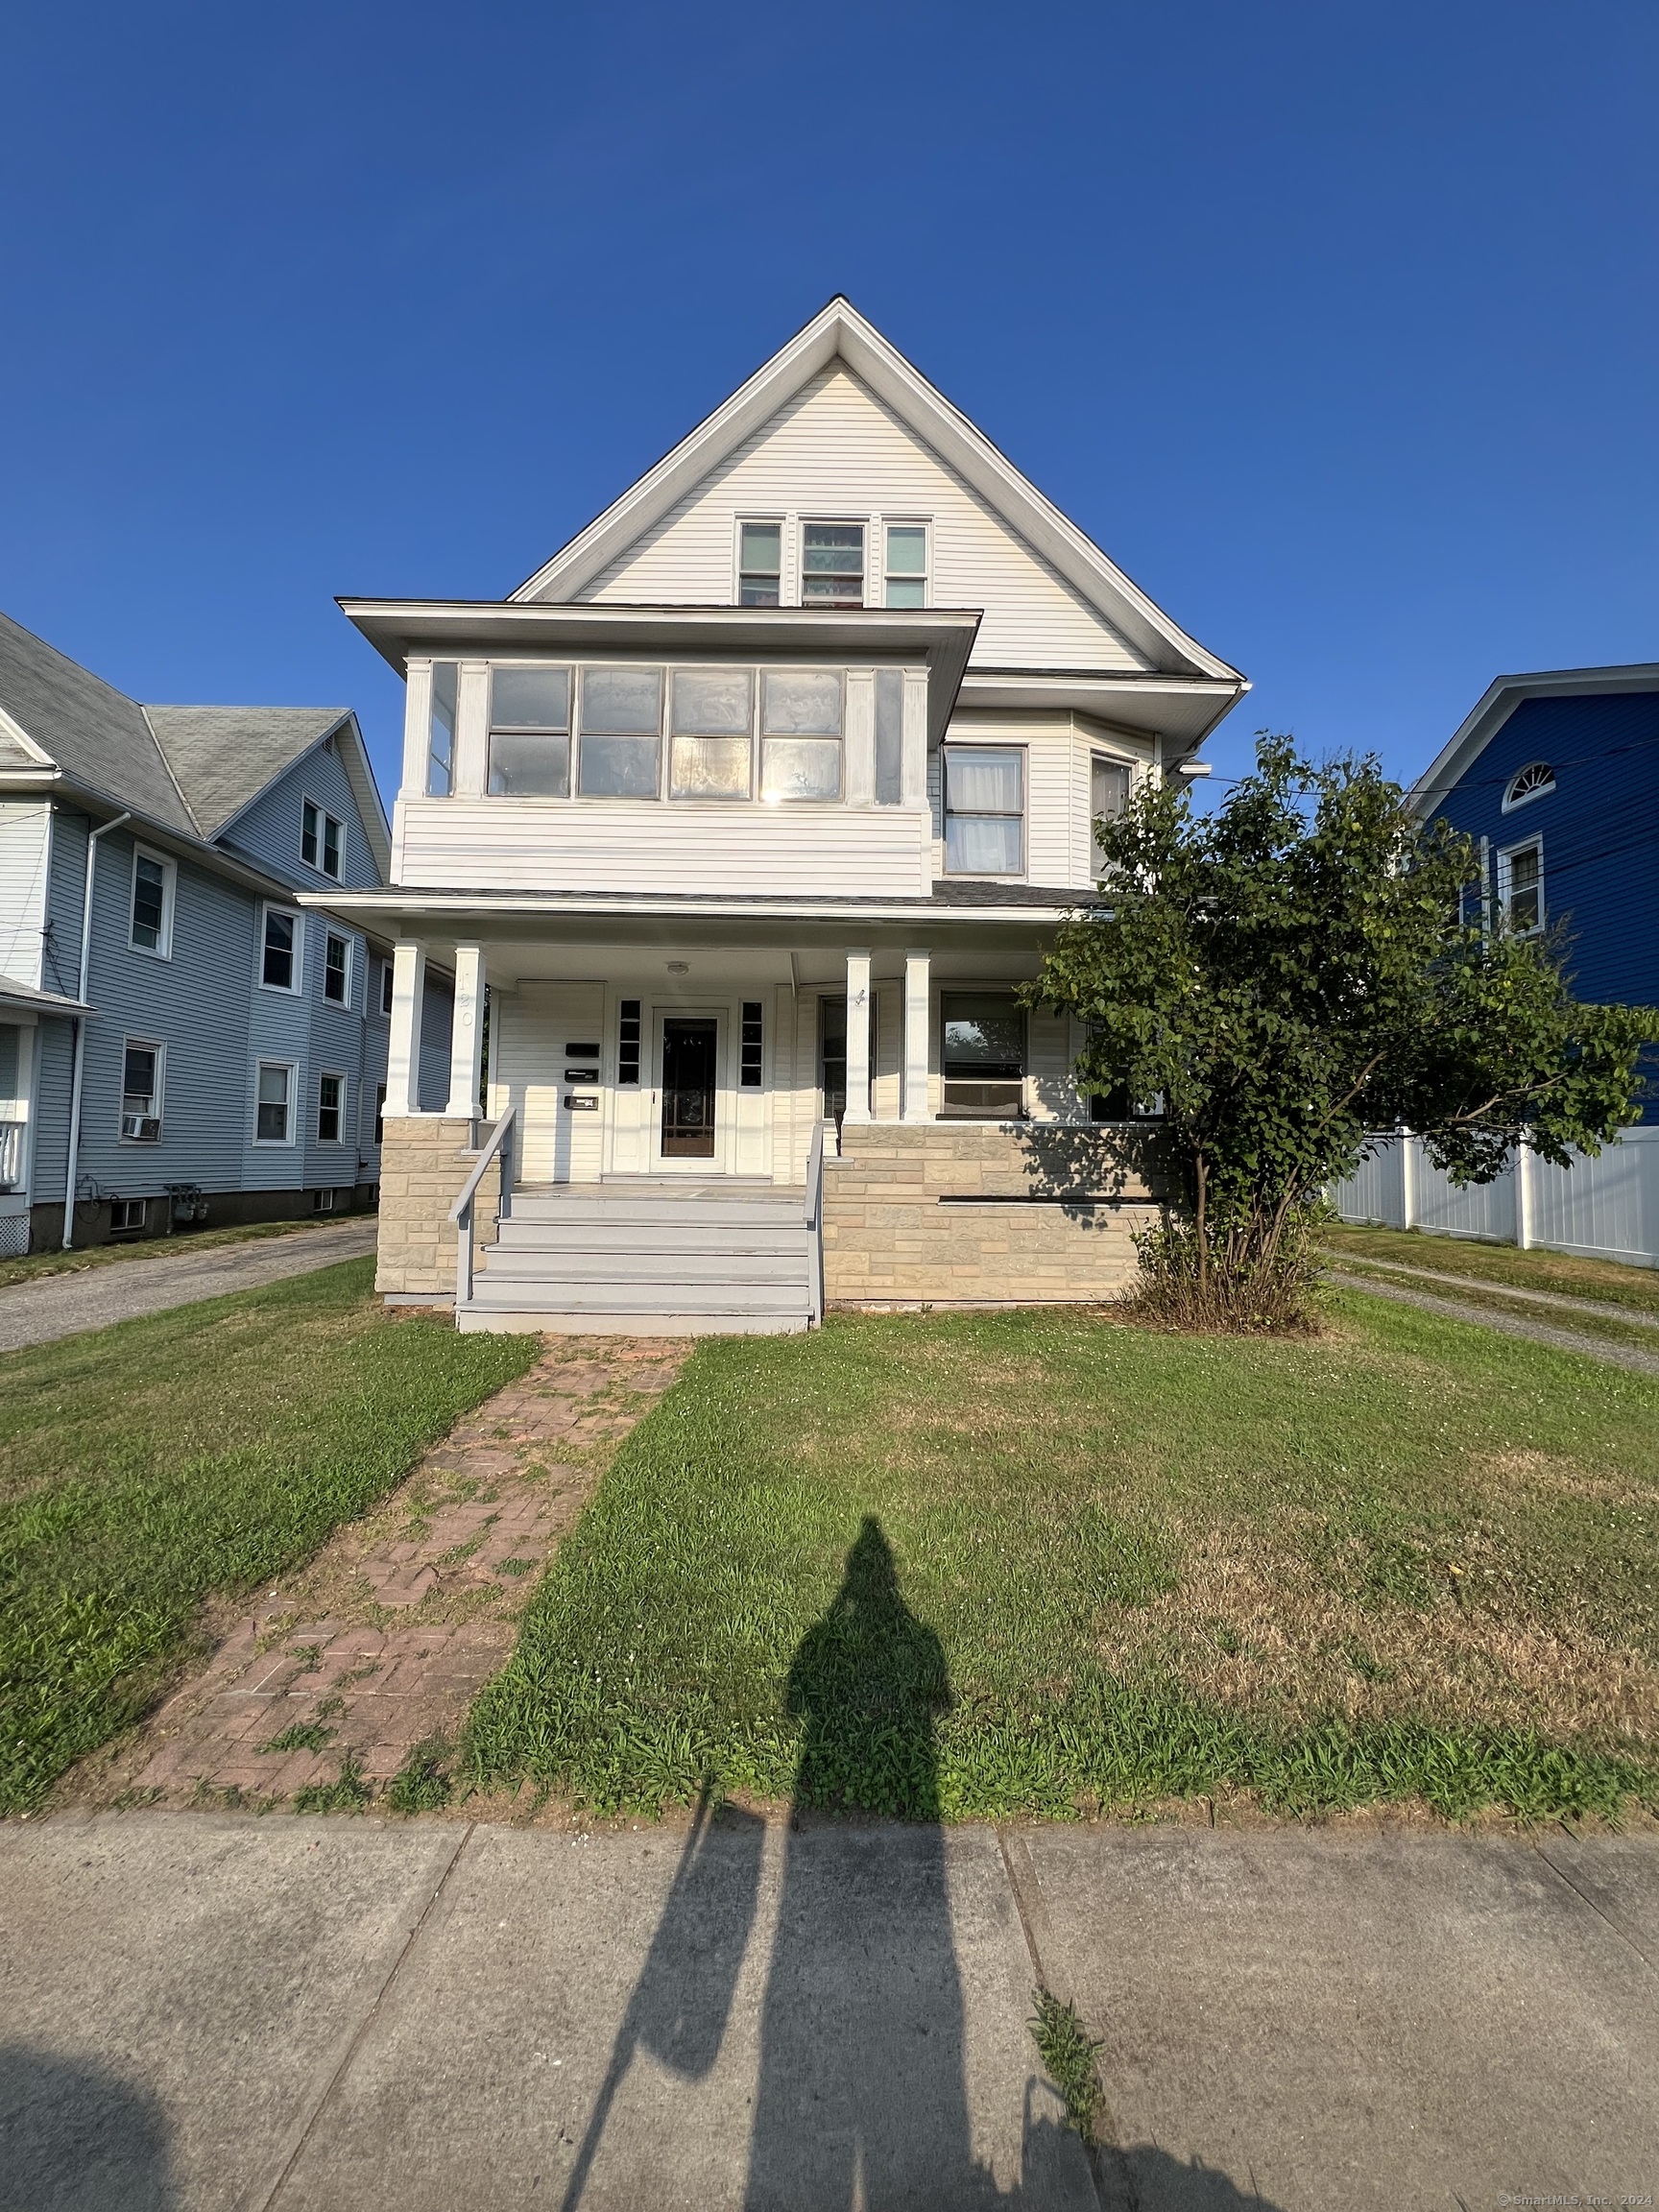 Rental Property at 118 Sutton Avenue, Stratford, Connecticut - Bedrooms: 2 
Bathrooms: 3 
Rooms: 11  - $2,300 MO.